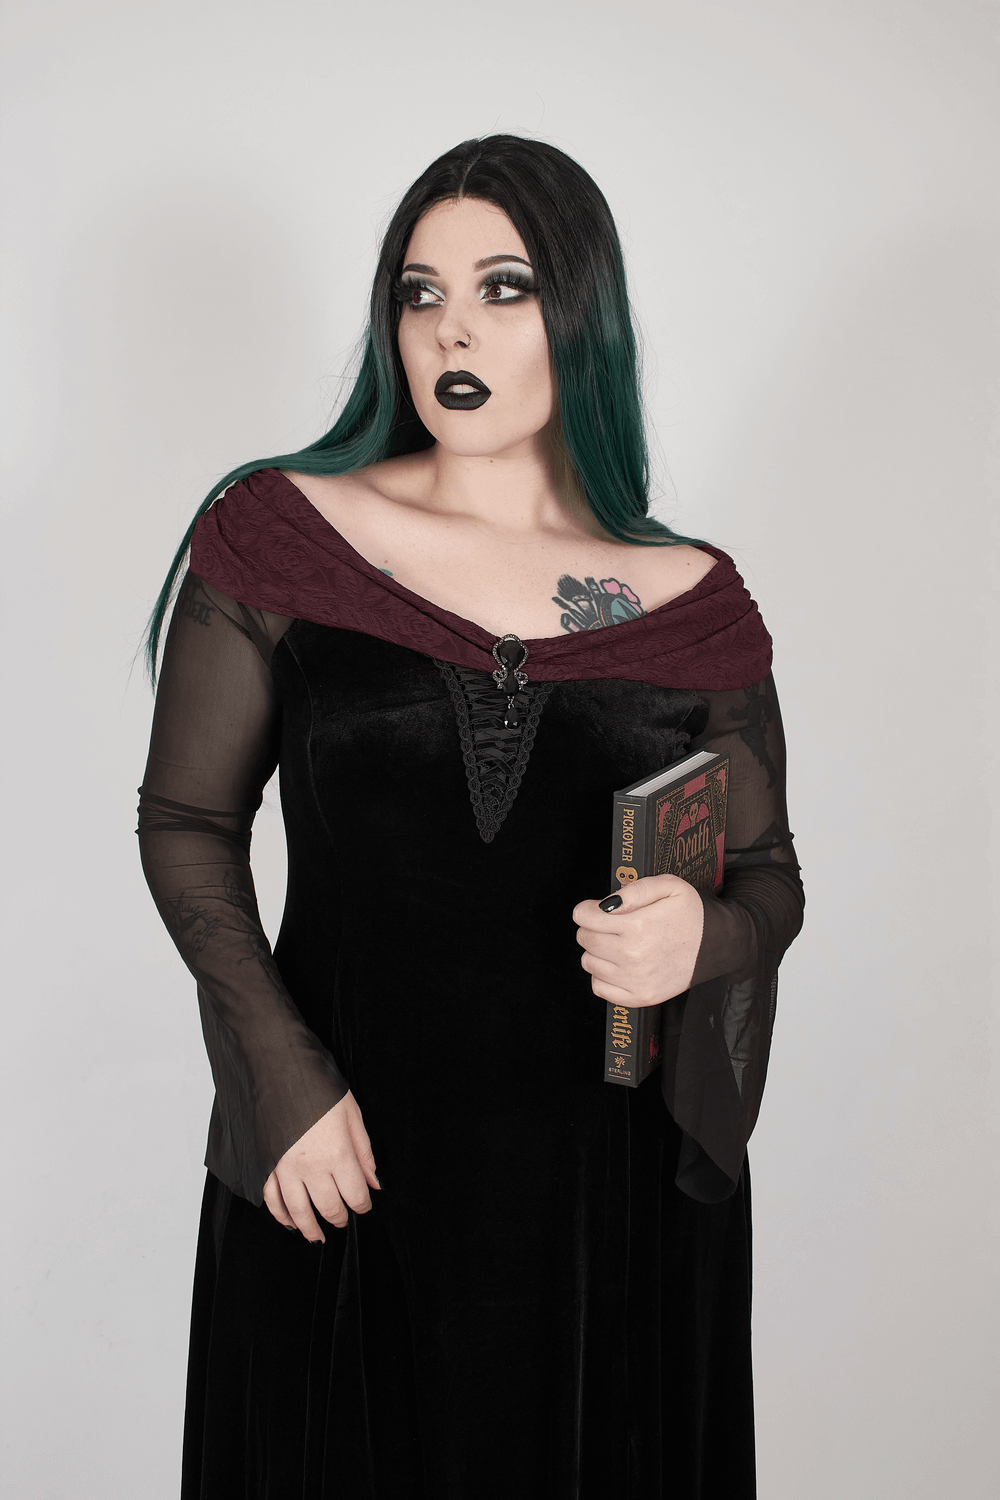 Victorian Gothic Velvet Gown with Brooch and Mesh Sleeves - HARD'N'HEAVY